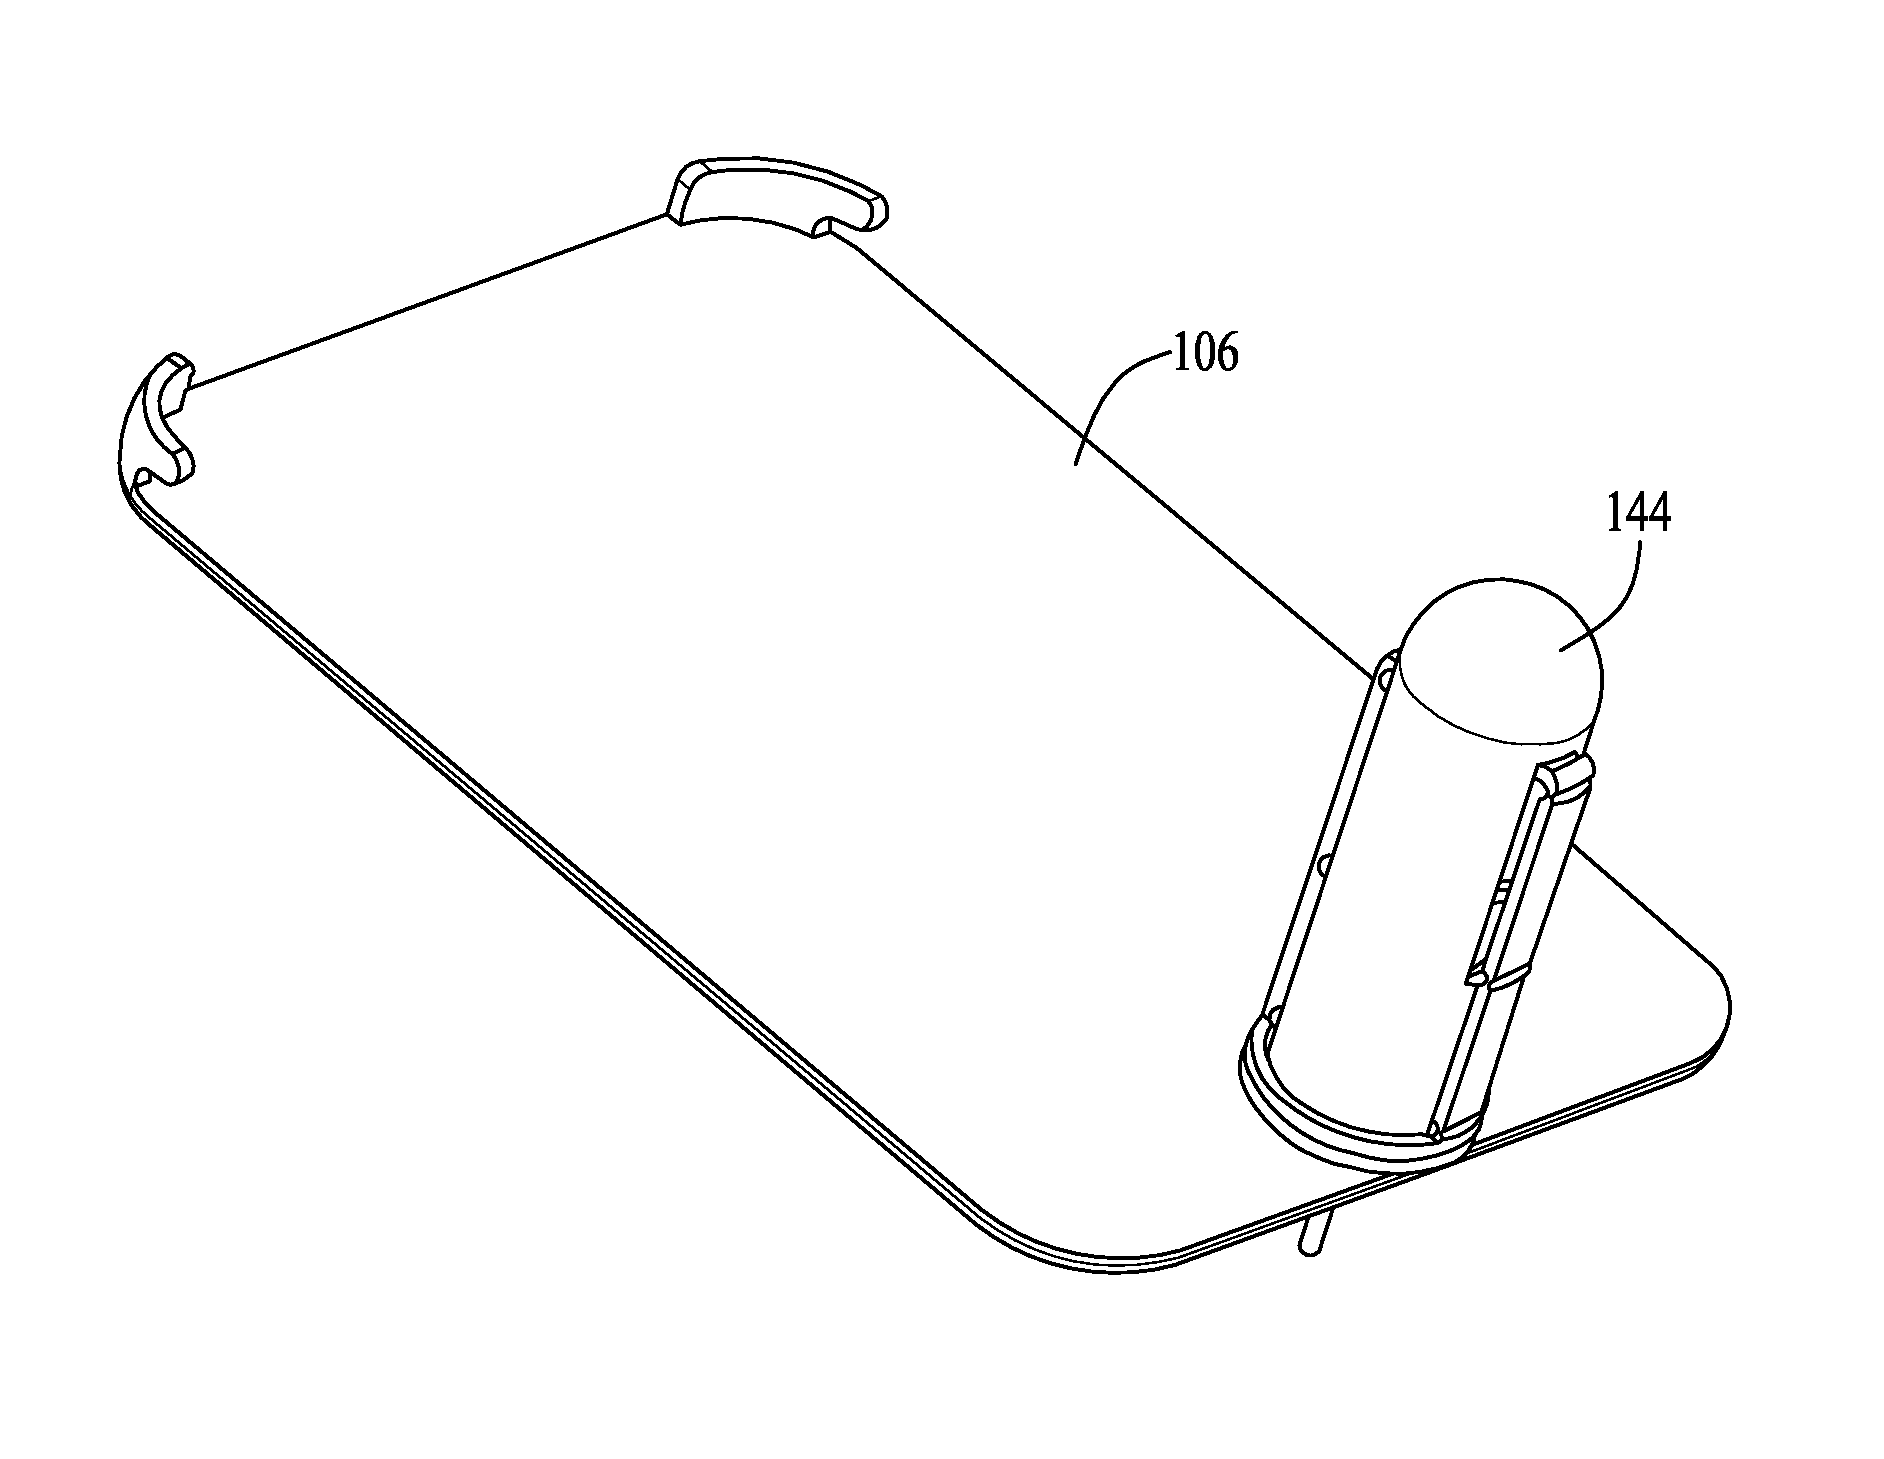 Adhesive Patch Systems and Methods